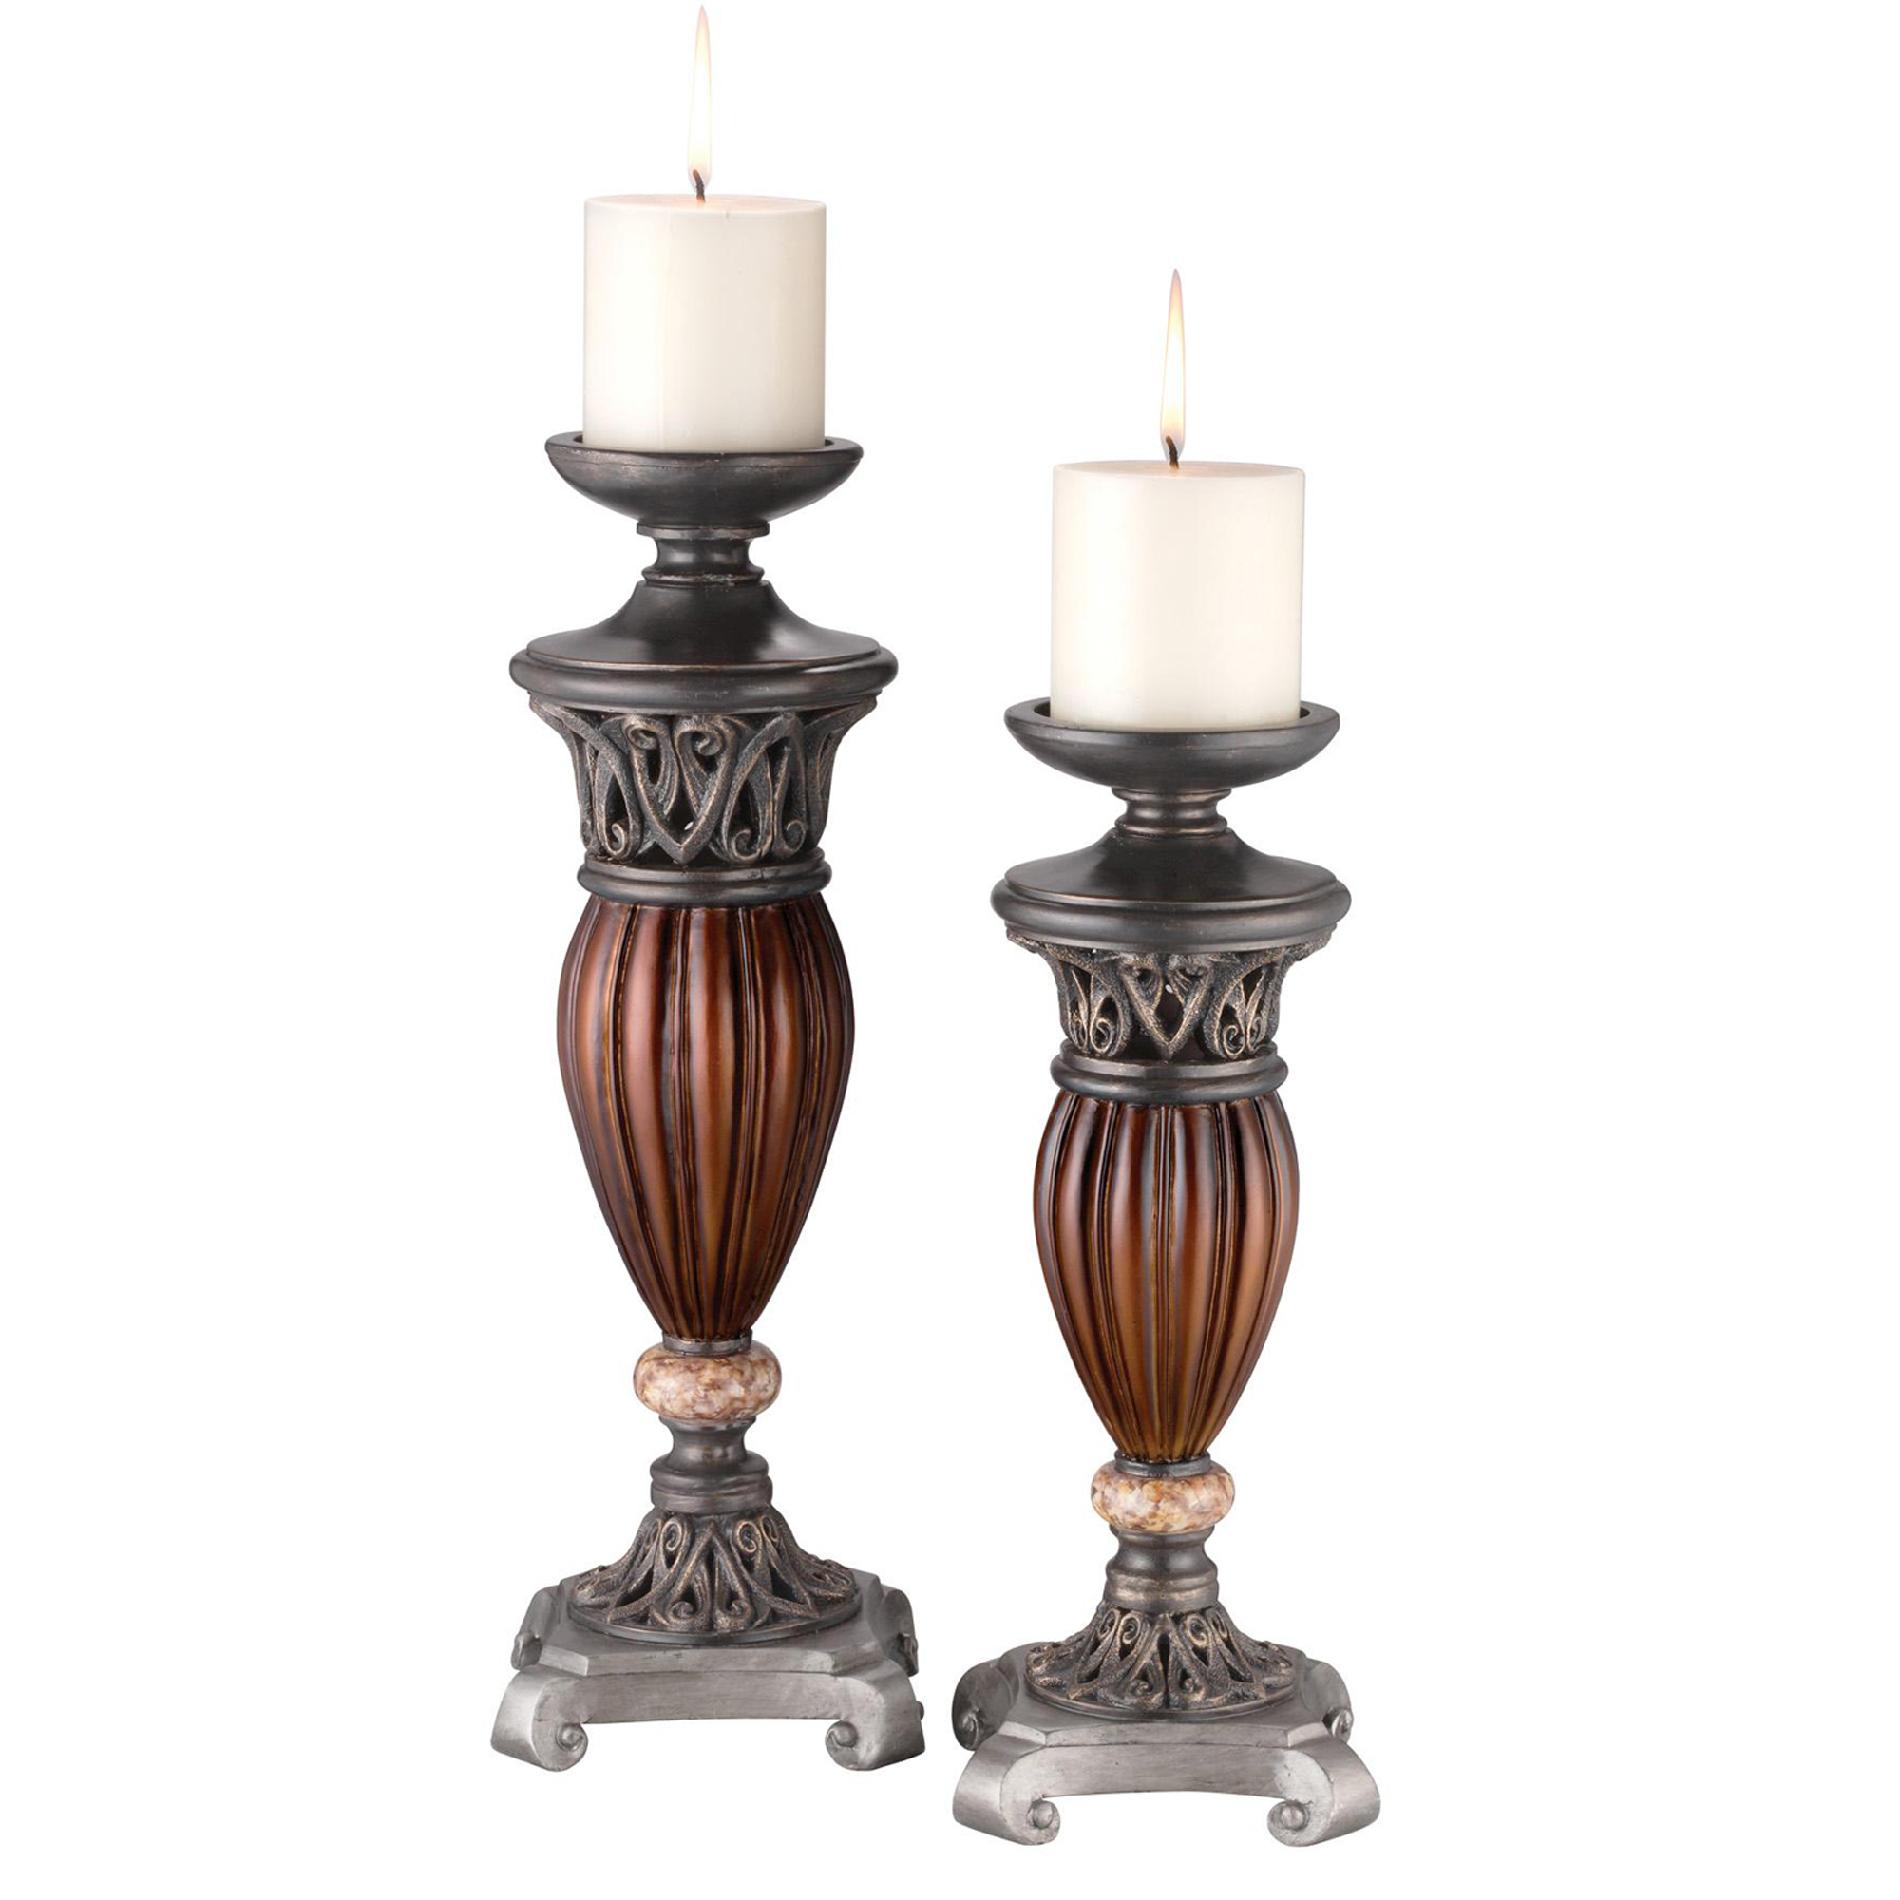 Ore International 16/13"H Roman Bronze Collection- Two In One Candleholder Set